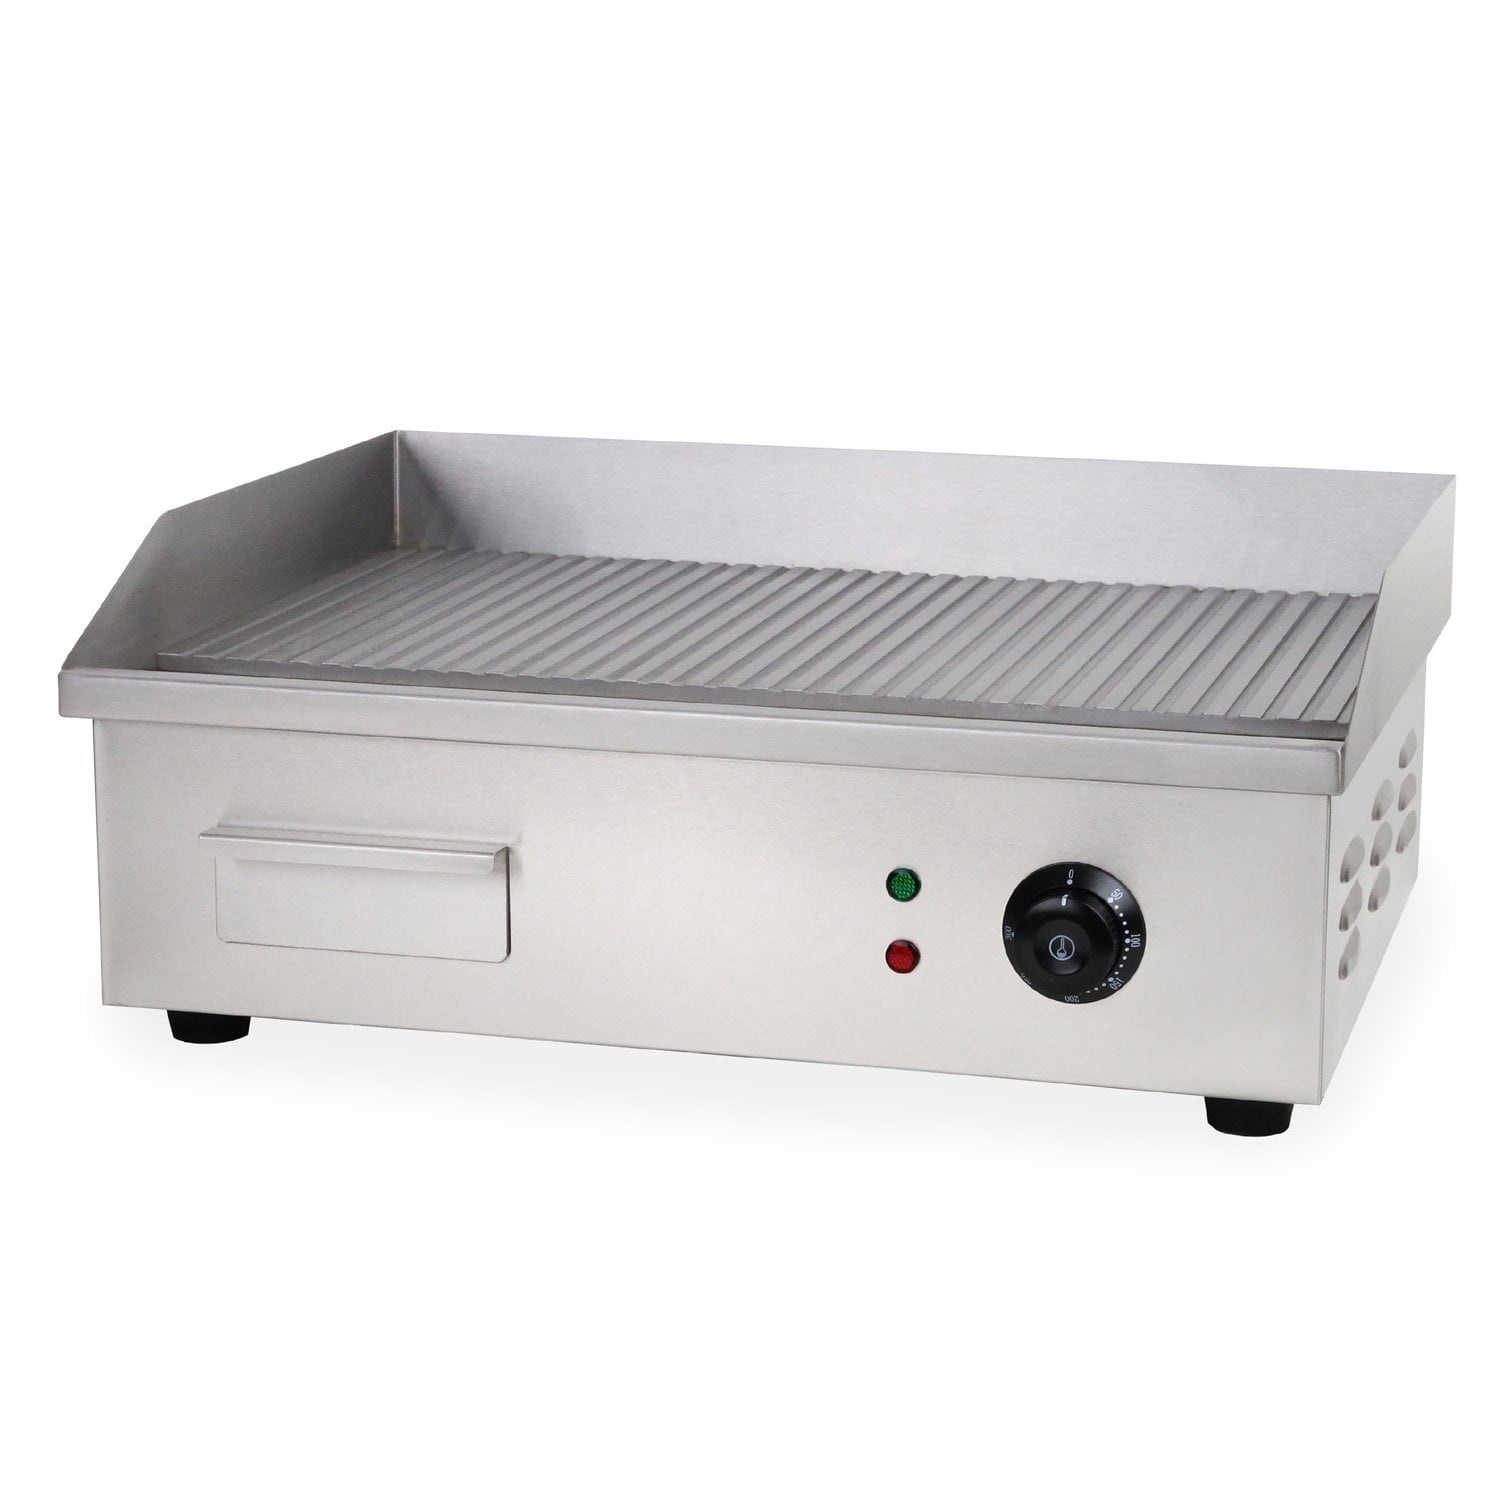 WYZworks Commercial Electric Counter Ridged Grill Manual Temperature Adjustable Thermostatic